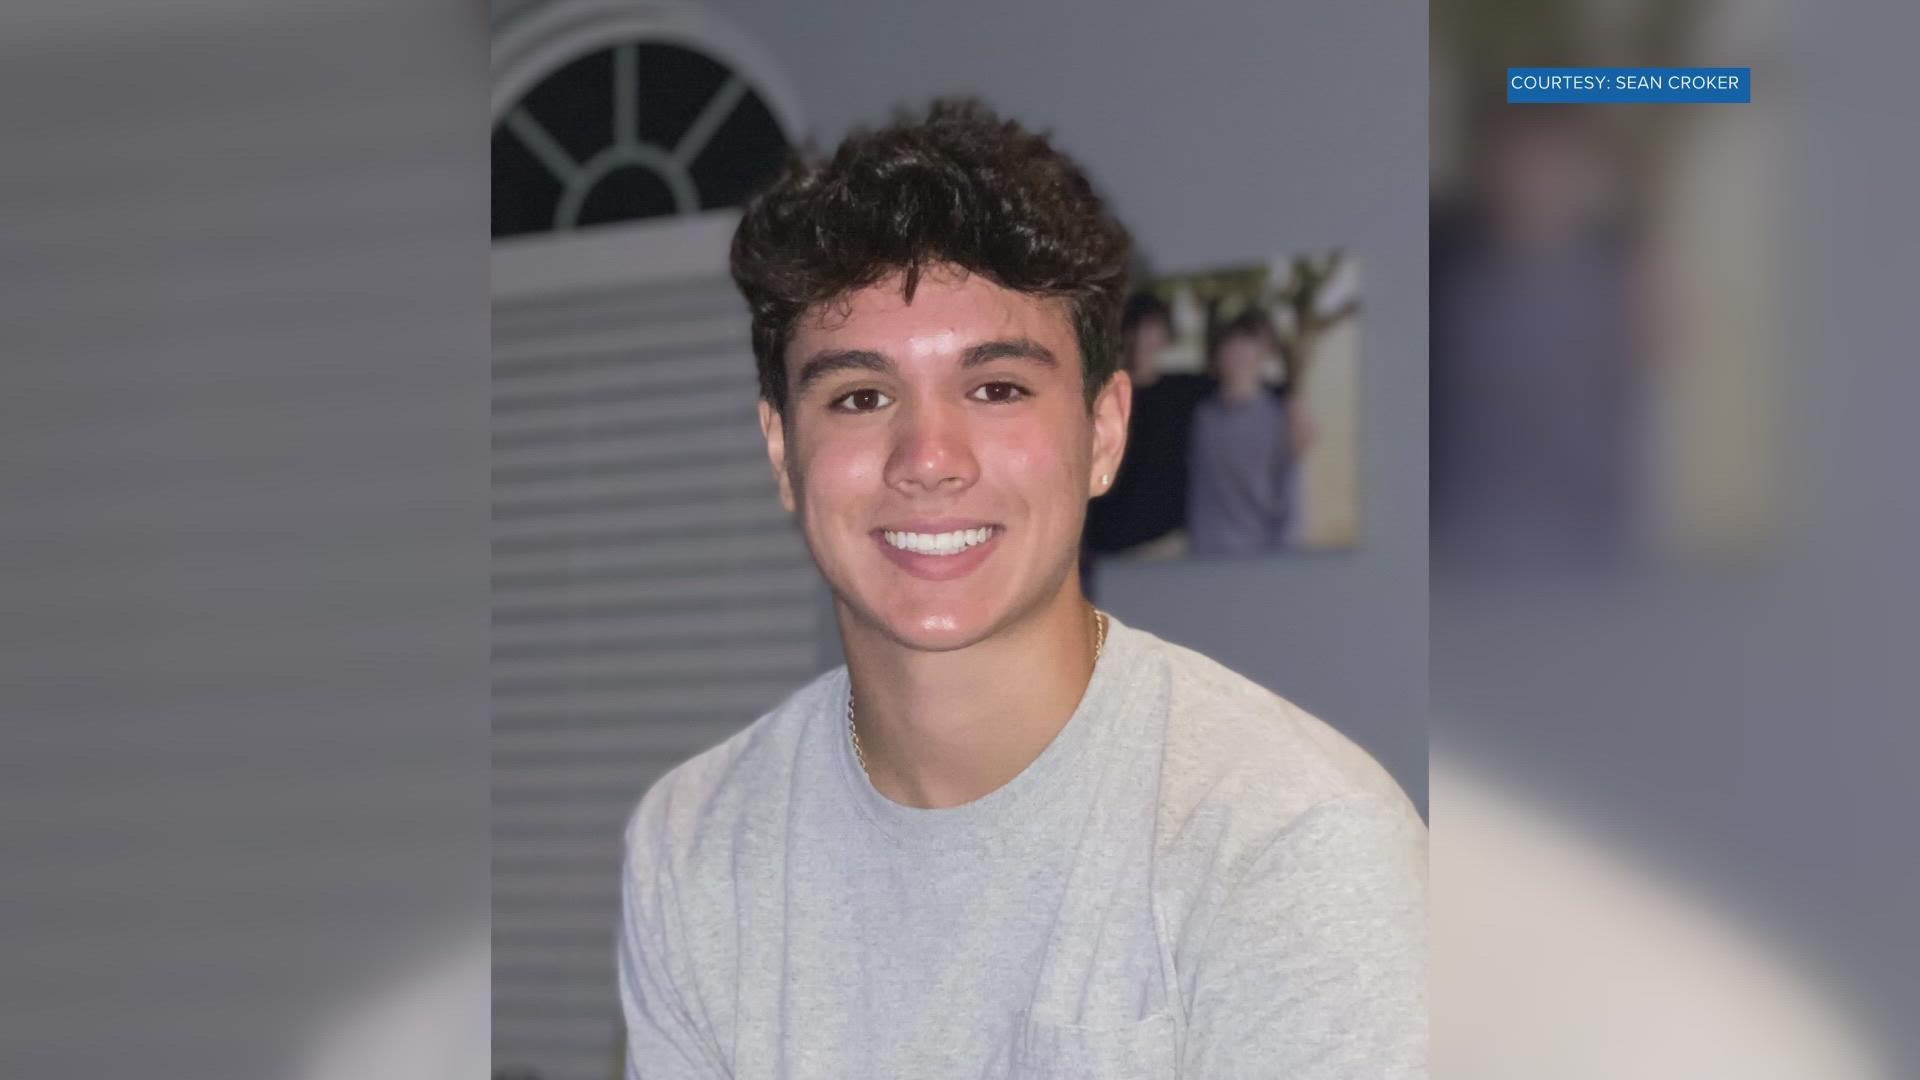 Knoxville police said 21-year-old Alexander Humphrey's died trying to stop his motorcycle. It was one of four motorcycle deaths this week in East Tennessee.